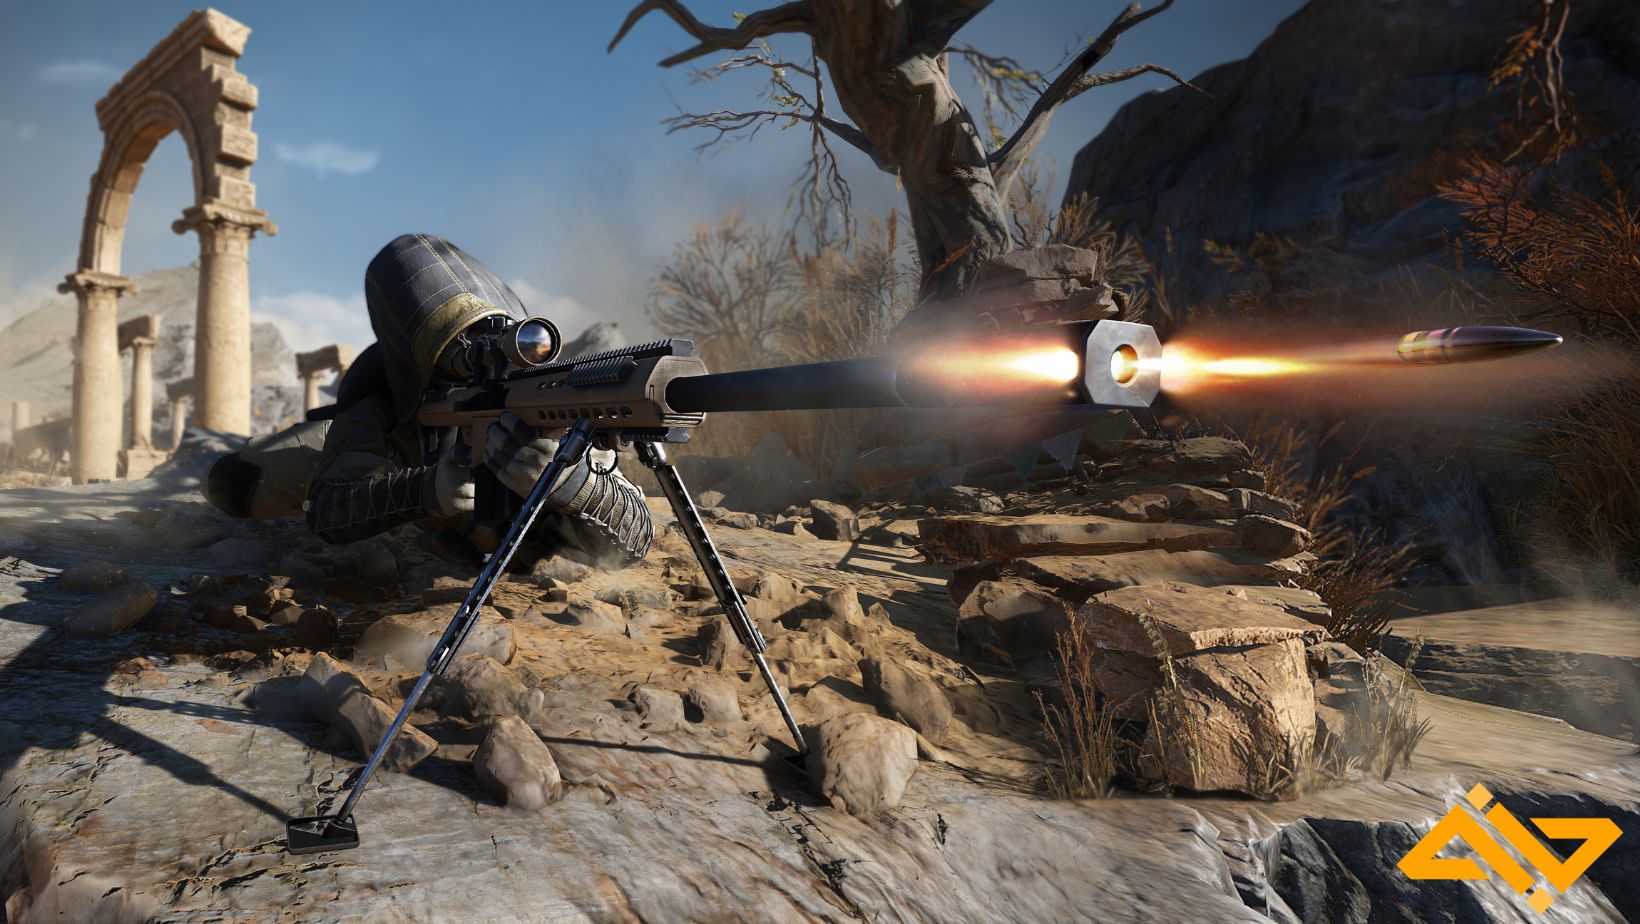 It is a standard sniper shooting experience, complete with bullet drop physics and slow-motion close-up kill shots.